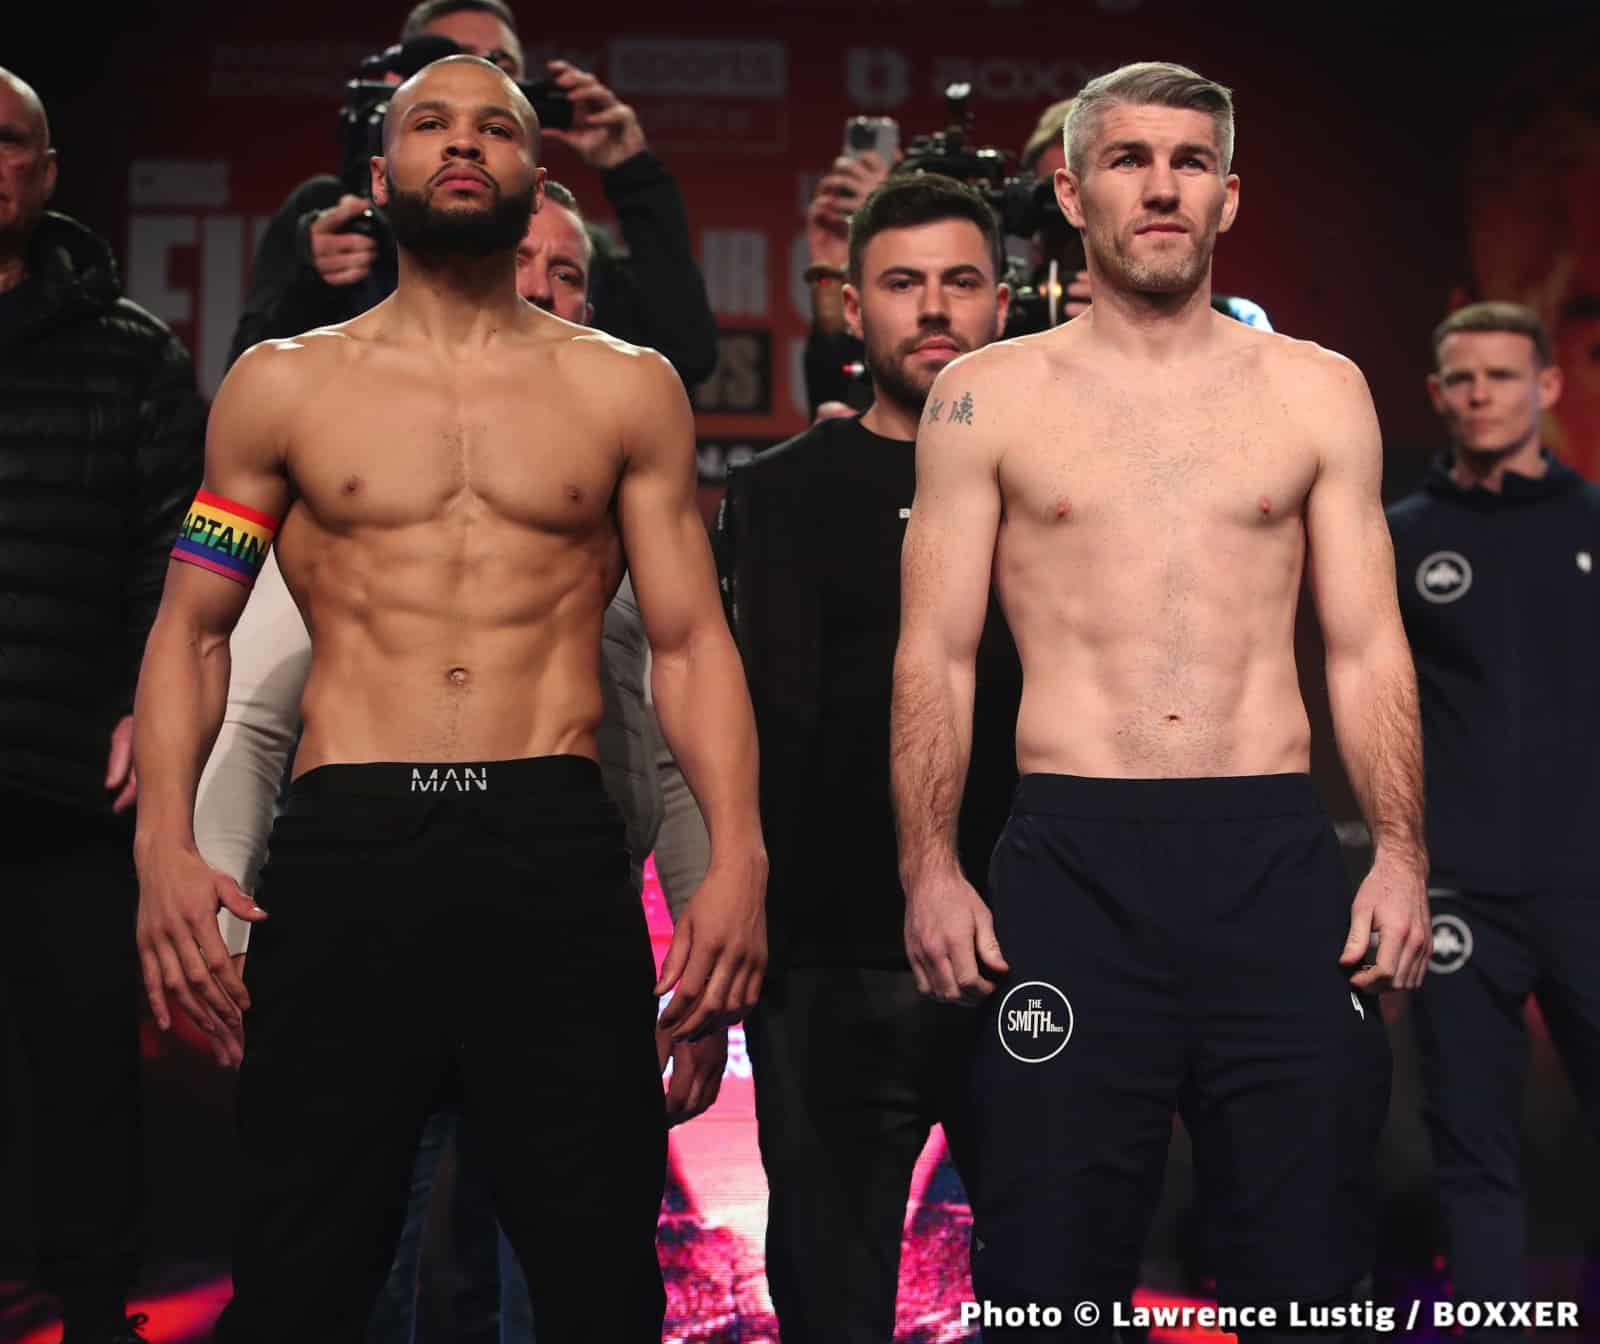 Chris Eubank Jr, Liam Smith Weigh-In – Both Come In At 159 Pounds